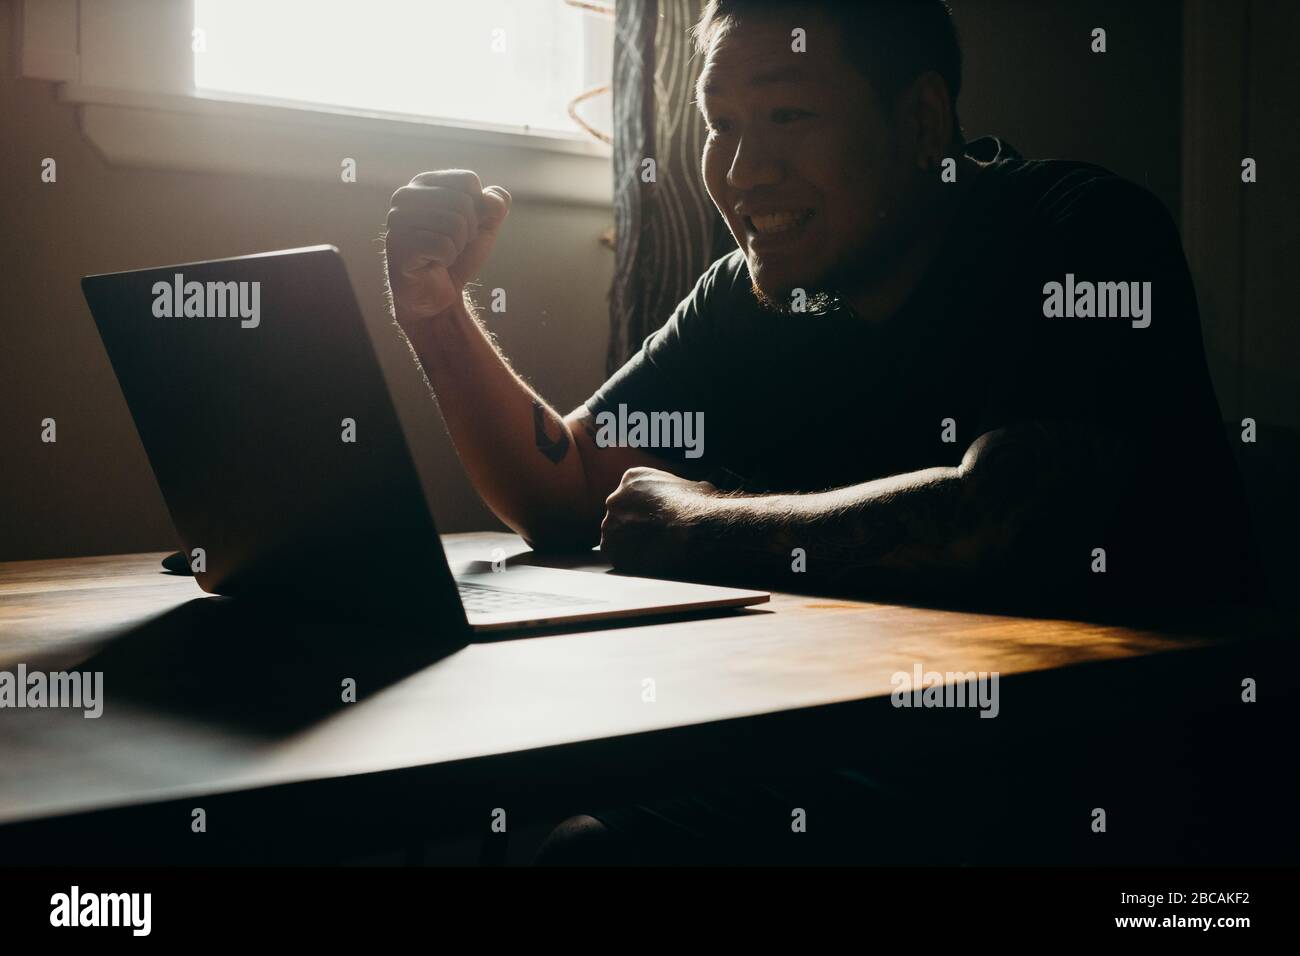 A asian man working  on laptop in dark area. Happy gesture. Stock Photo